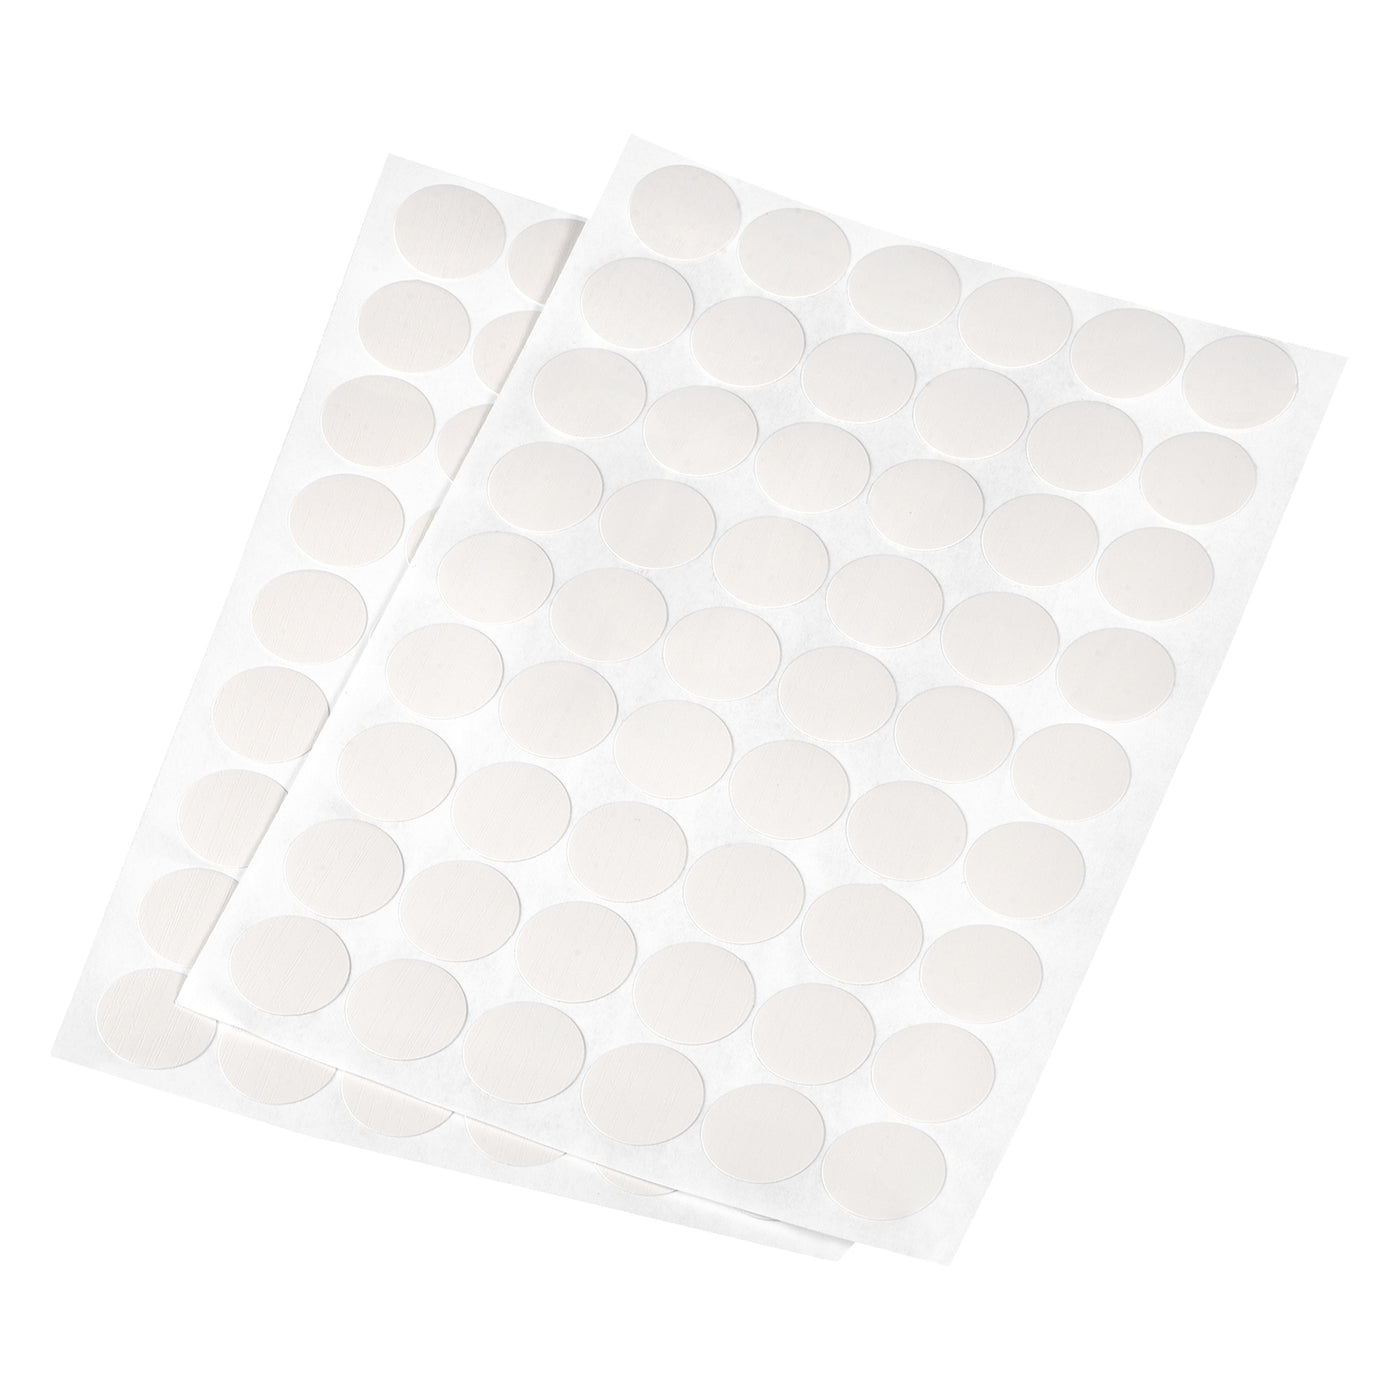 uxcell Uxcell Screw Hole Cover Stickers, 21mm Dia PVC Self Adhesive Covers Caps for Wood Furniture Cabinet Shelf Wardrobe, White Line 6 Sheet/324pcs